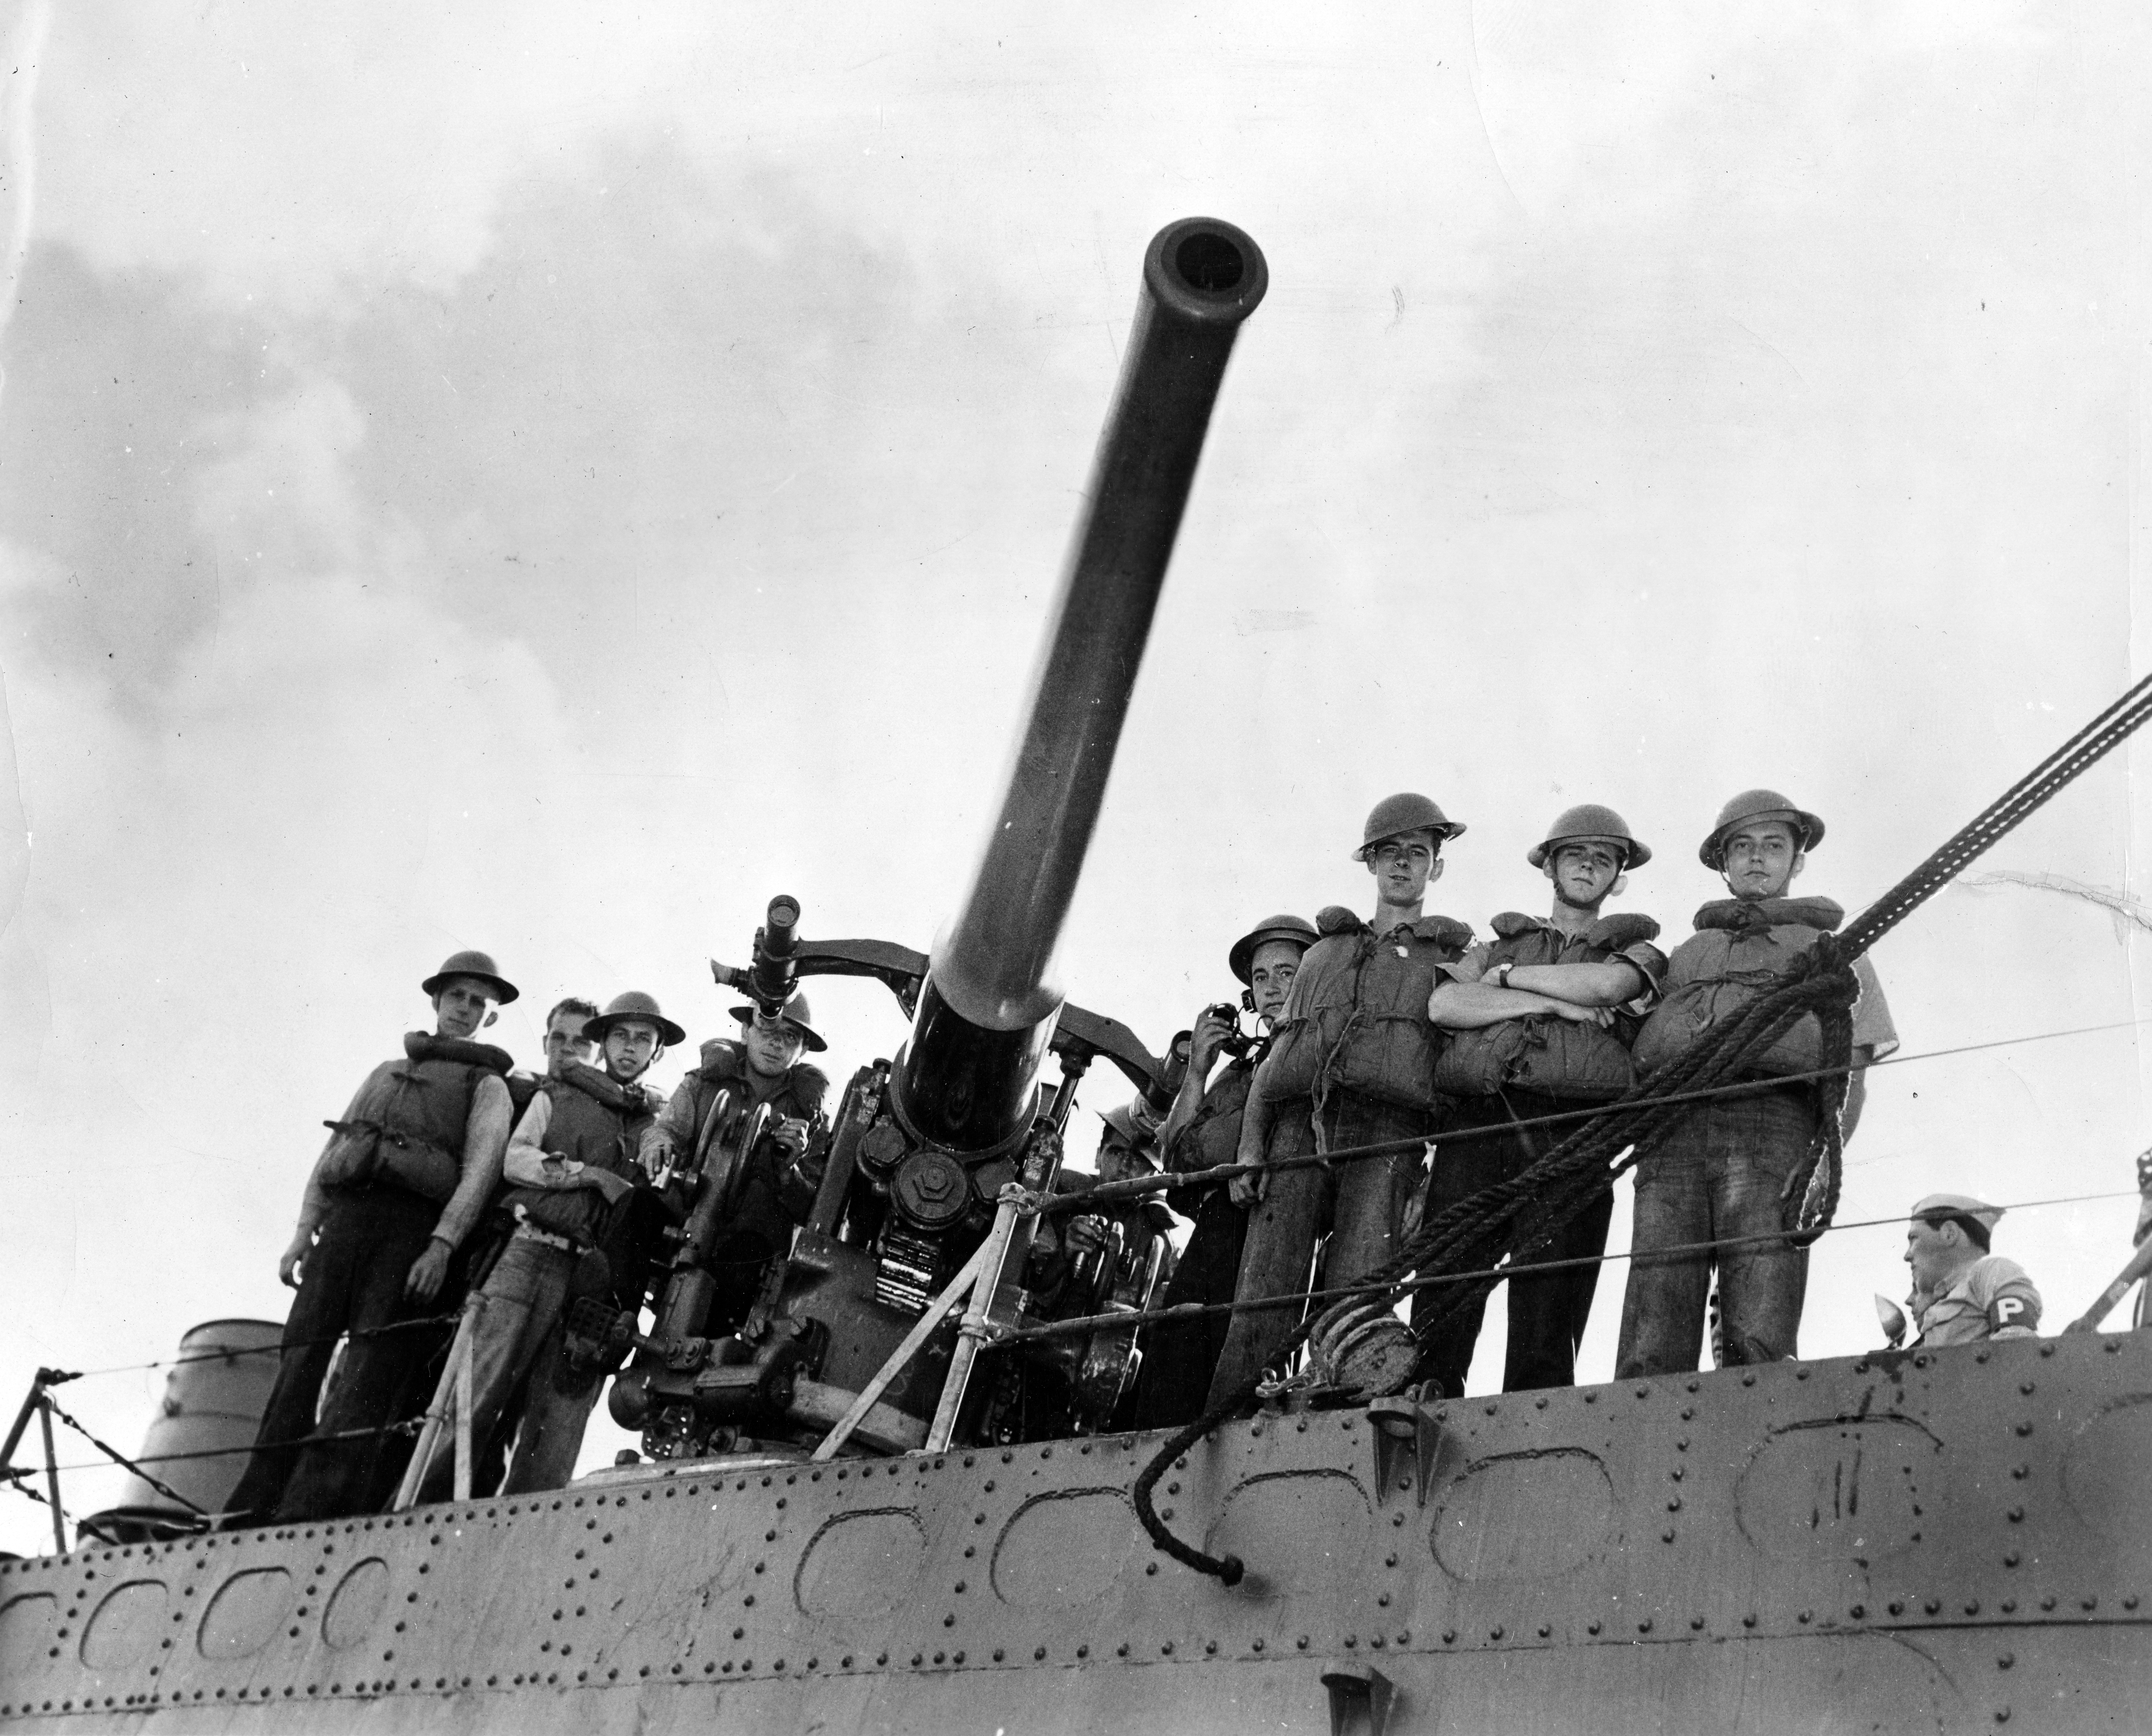 USS Ward's gun crew pose at their weapon after the destroyer sank a mini submarine outside of Pearl Harbor and "fired the first shot" of the war in the Pacific. Credit: Naval History and Heritage Command NH 97446